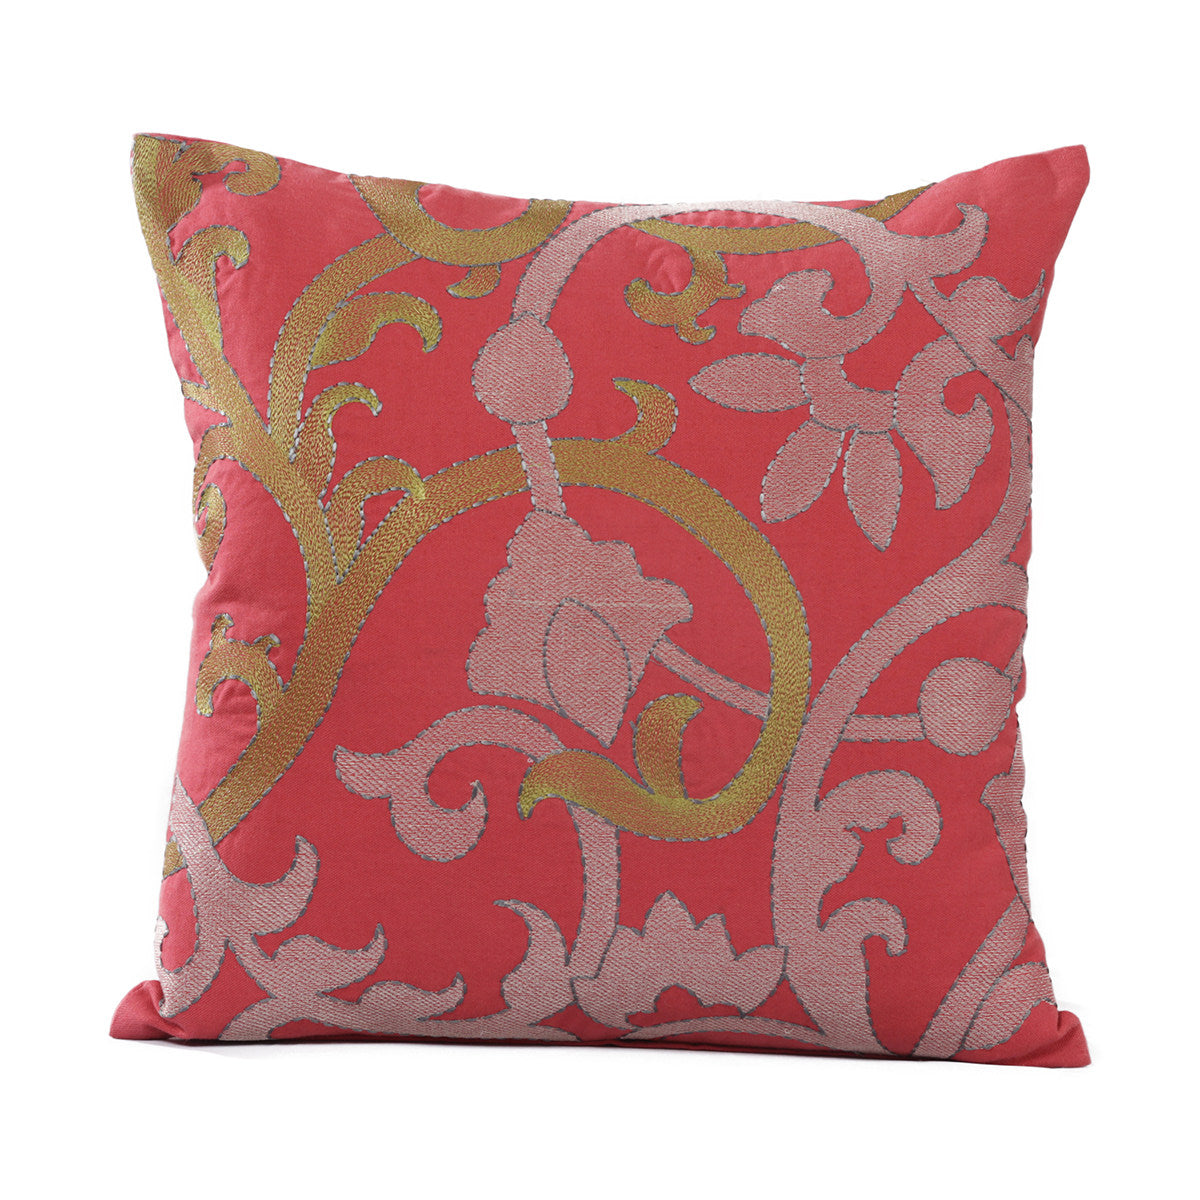 Palmette Scroll Embroidered Cushion Cover